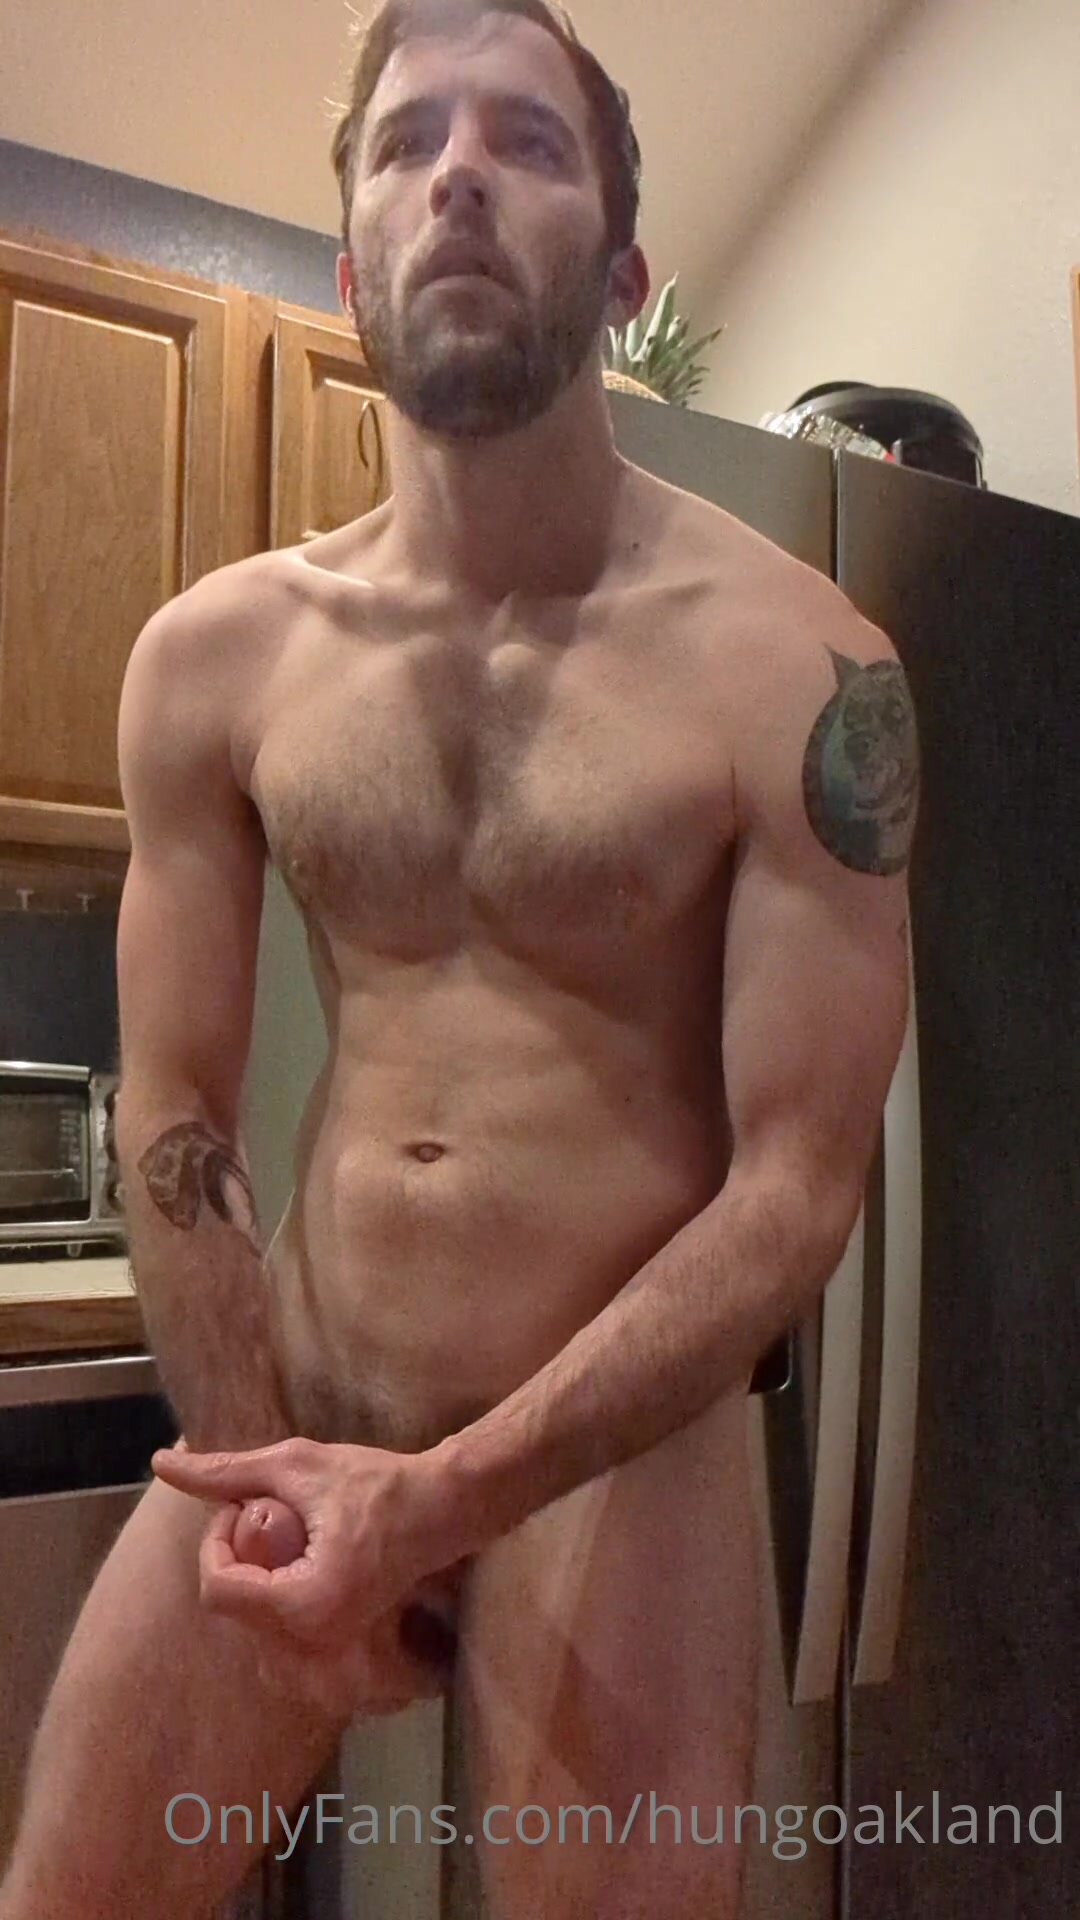 Scruffy dude jerking off in the kitchen